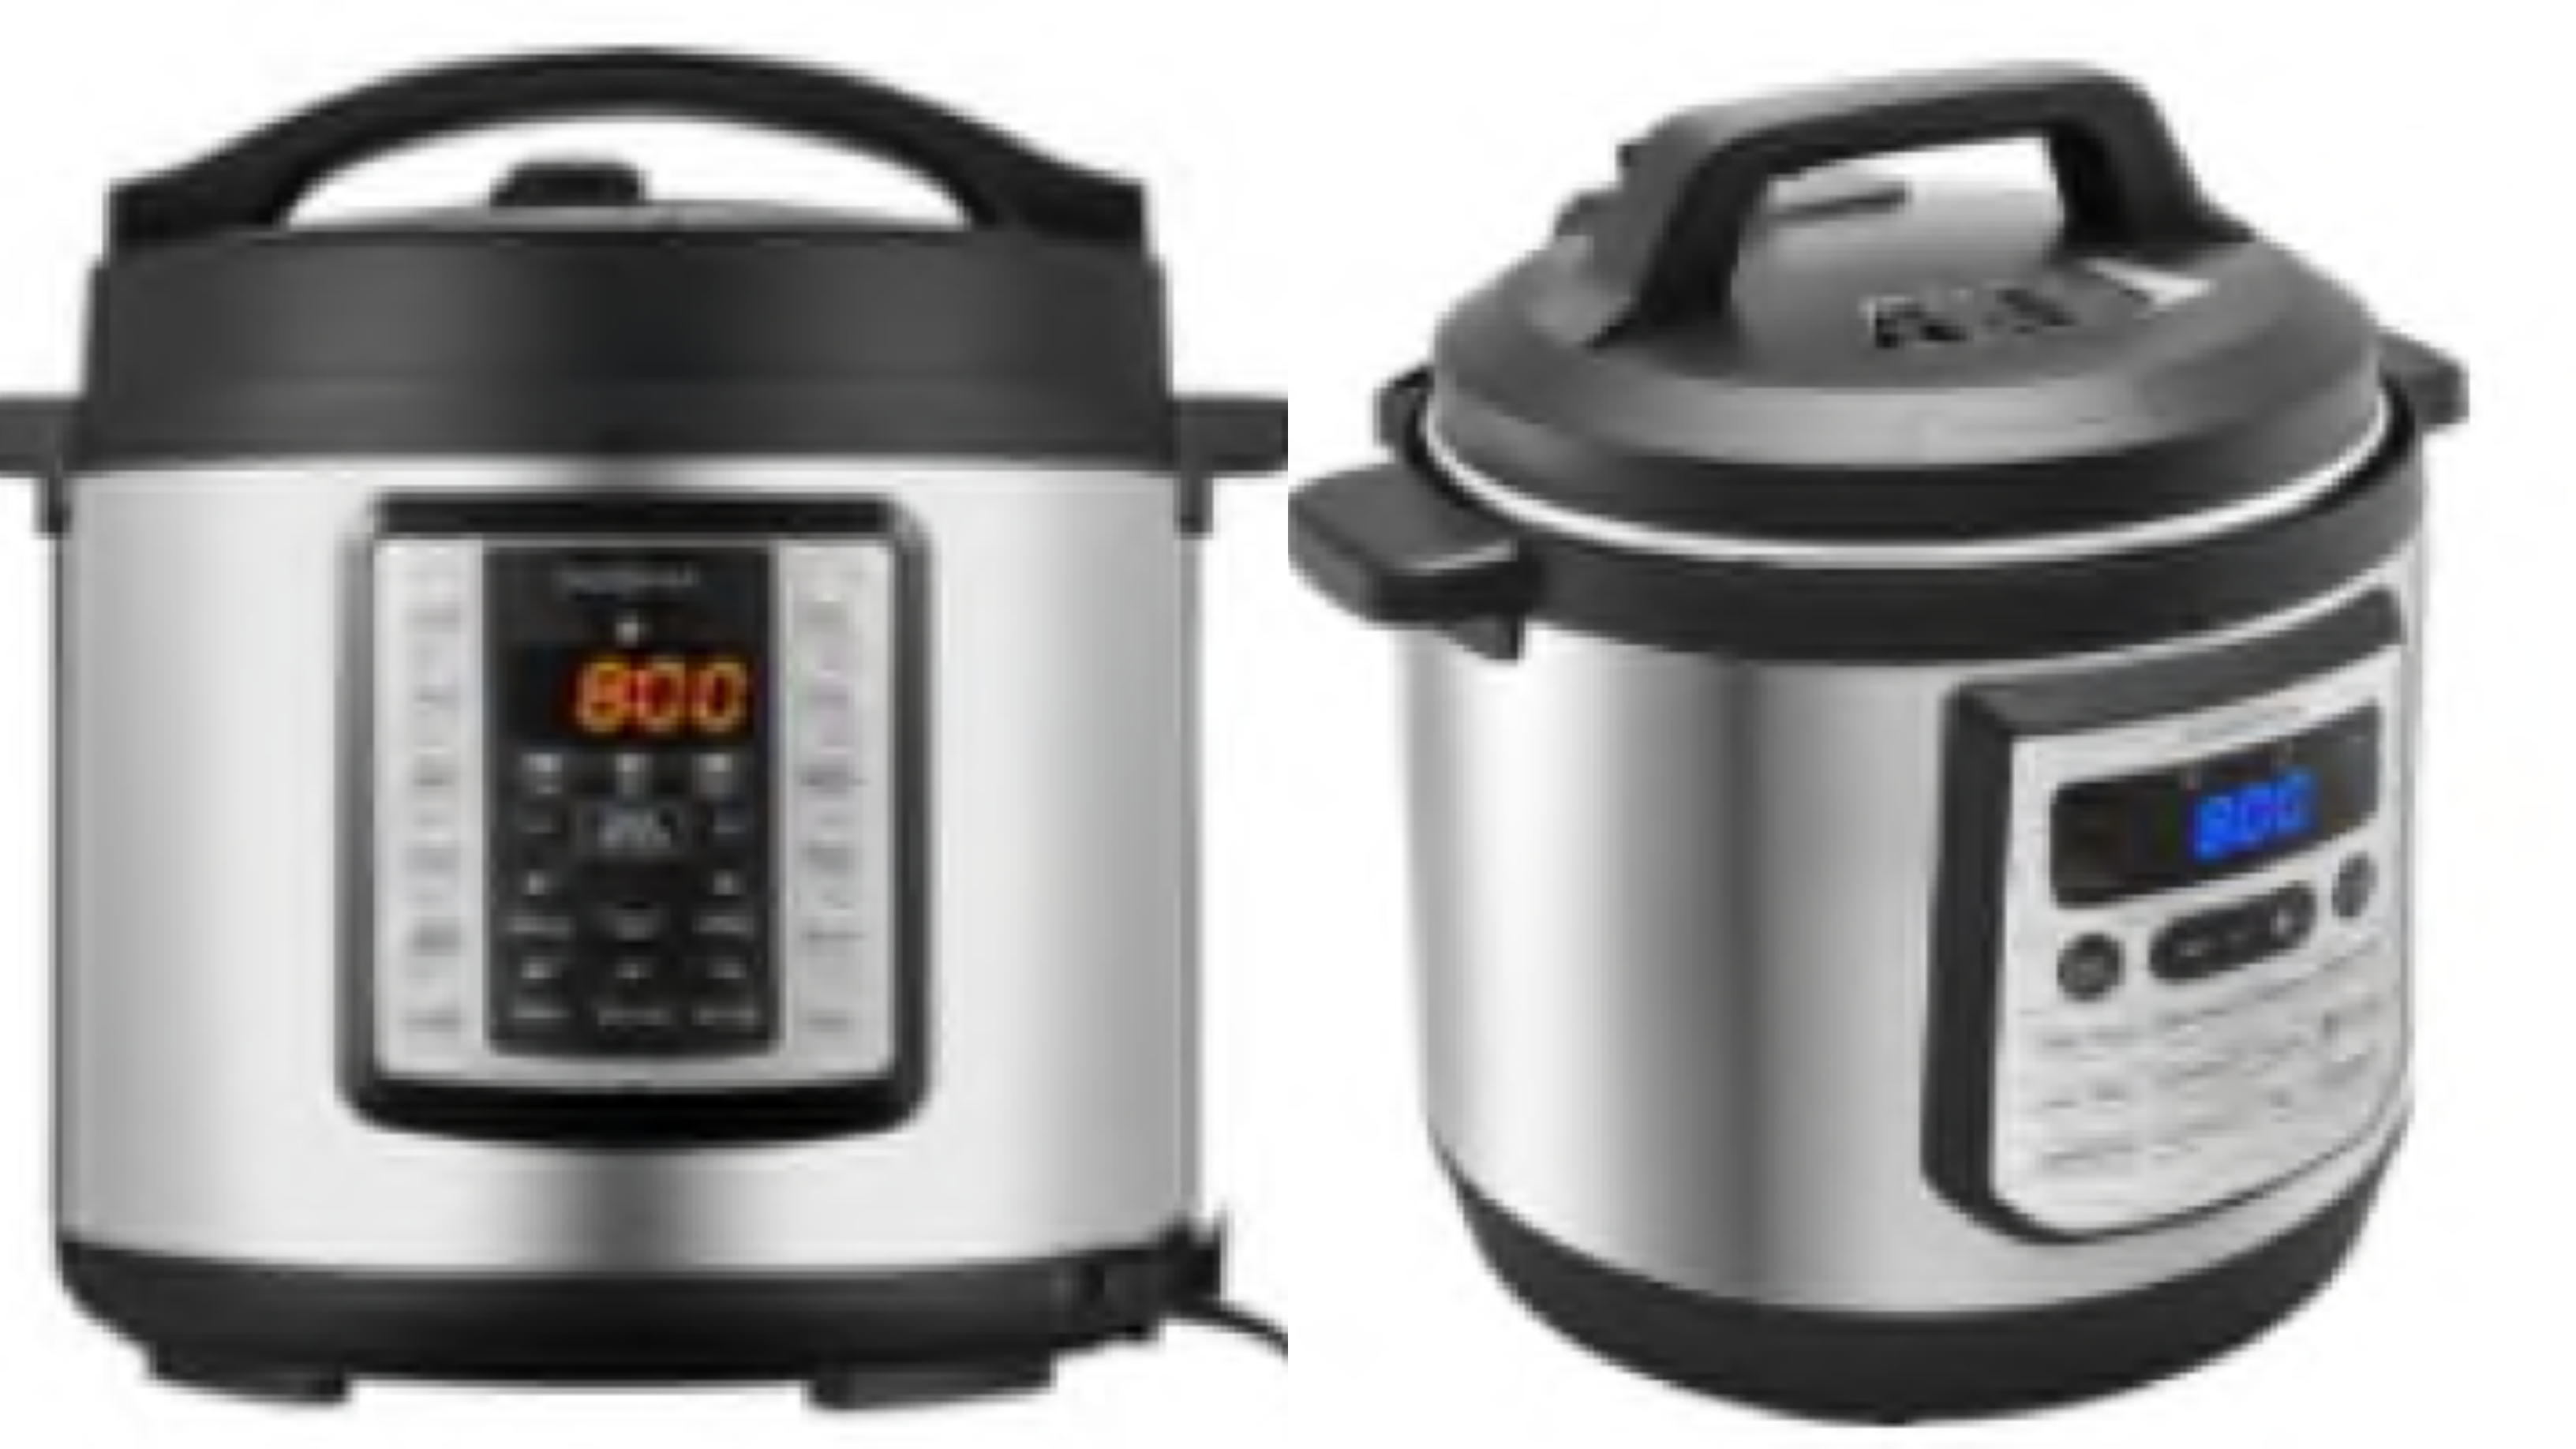 Pressure cookers recalled after hot liquids ejected during venting